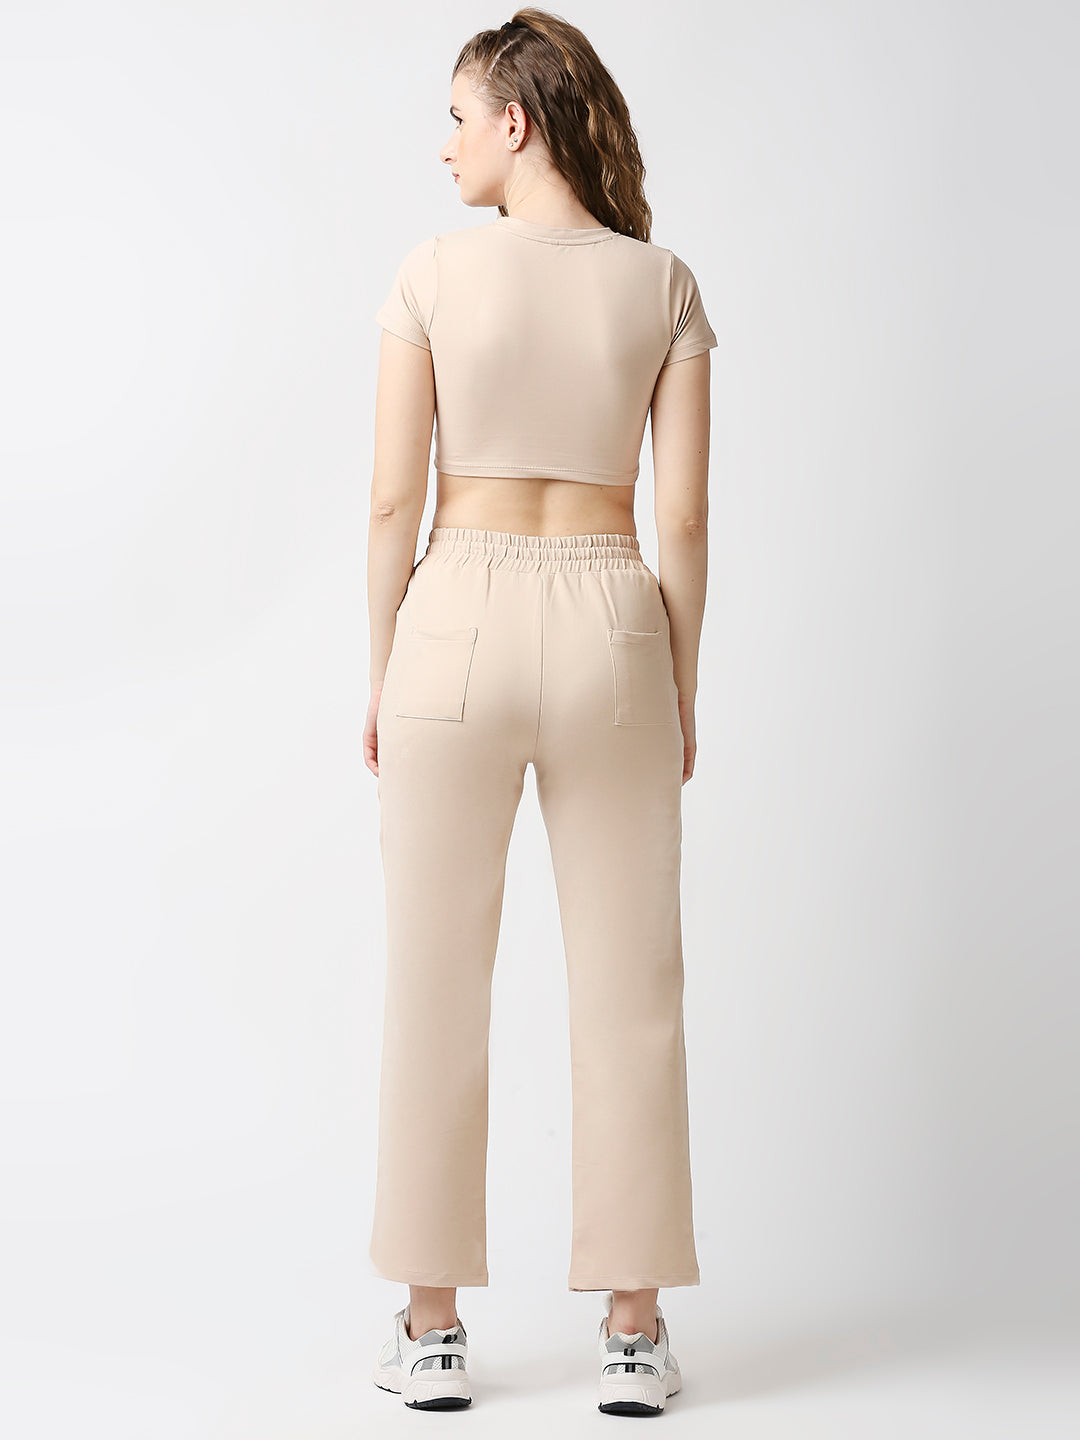 Disrupt Women Beige Straight Pants With Crop Top Co-rd Set (2pc)